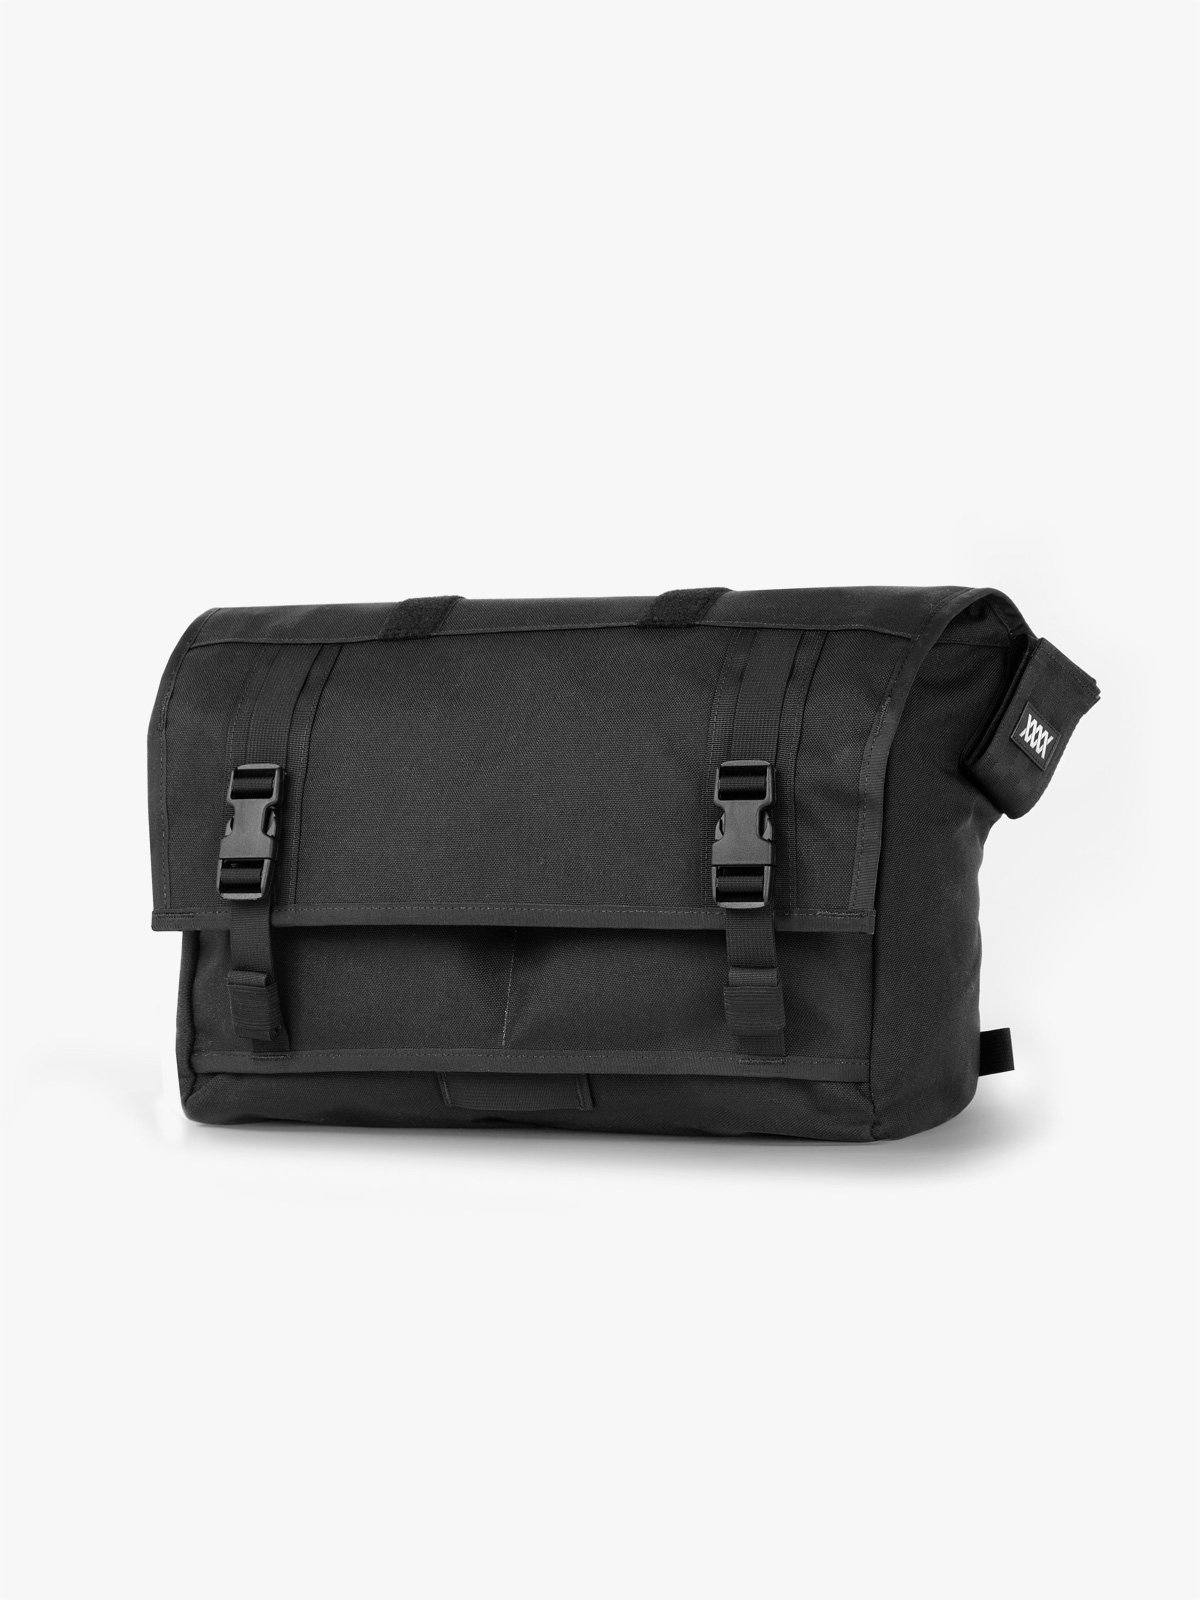 Monty by Mission Workshop - Weatherproof Bags & Technical Apparel - San Francisco & Los Angeles - Built to endure - Guaranteed forever